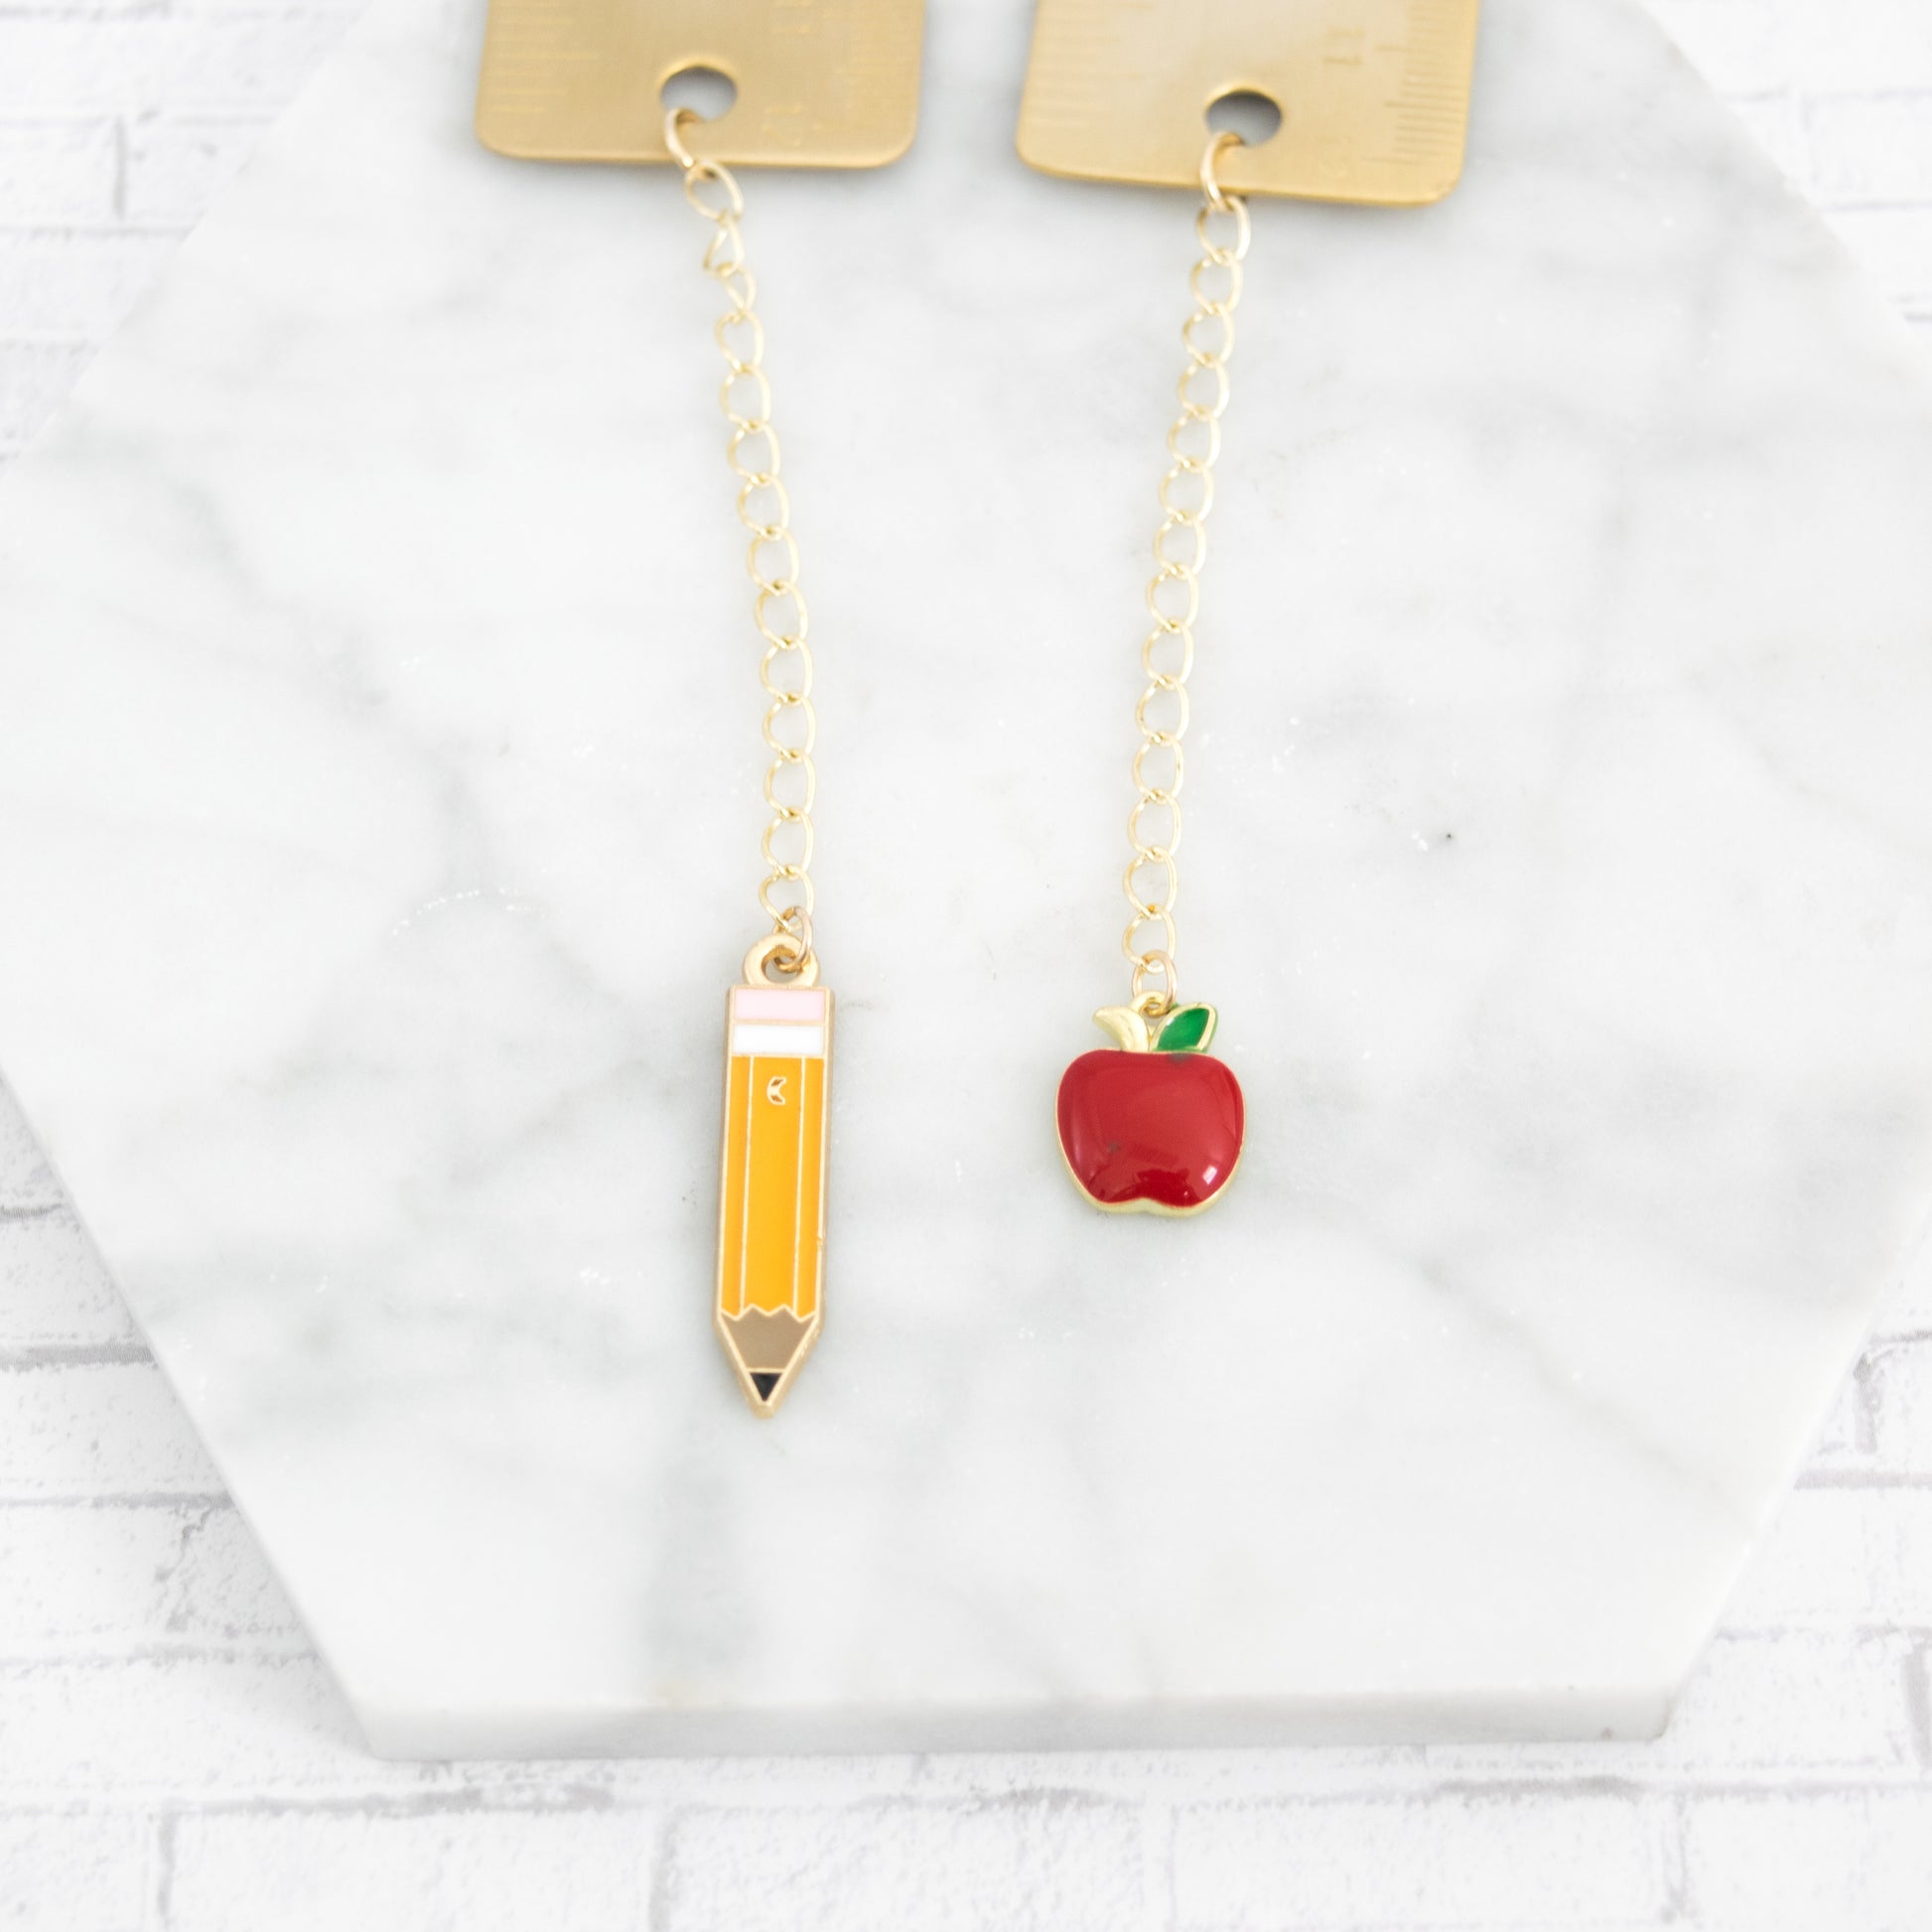 Personalized Teacher Brass Bookmark enameled charm options: pencil or apple